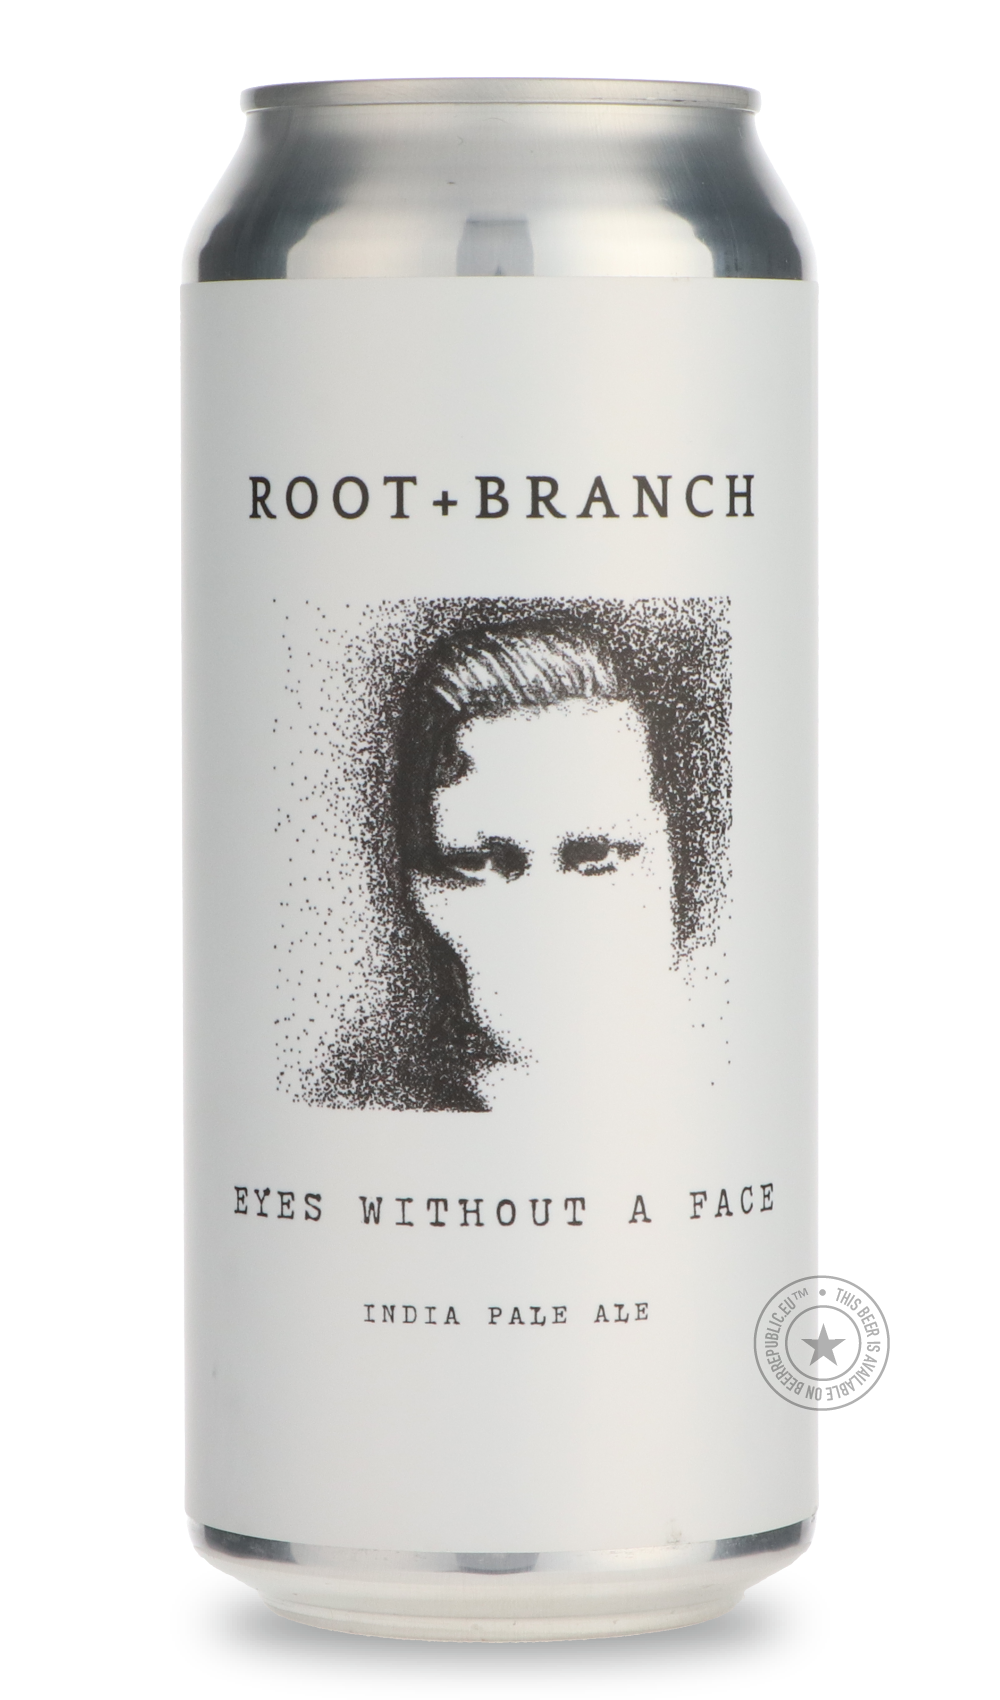 -Root + Branch- Eyes Without A Face-IPA- Only @ Beer Republic - The best online beer store for American & Canadian craft beer - Buy beer online from the USA and Canada - Bier online kopen - Amerikaans bier kopen - Craft beer store - Craft beer kopen - Amerikanisch bier kaufen - Bier online kaufen - Acheter biere online - IPA - Stout - Porter - New England IPA - Hazy IPA - Imperial Stout - Barrel Aged - Barrel Aged Imperial Stout - Brown - Dark beer - Blond - Blonde - Pilsner - Lager - Wheat - Weizen - Amber